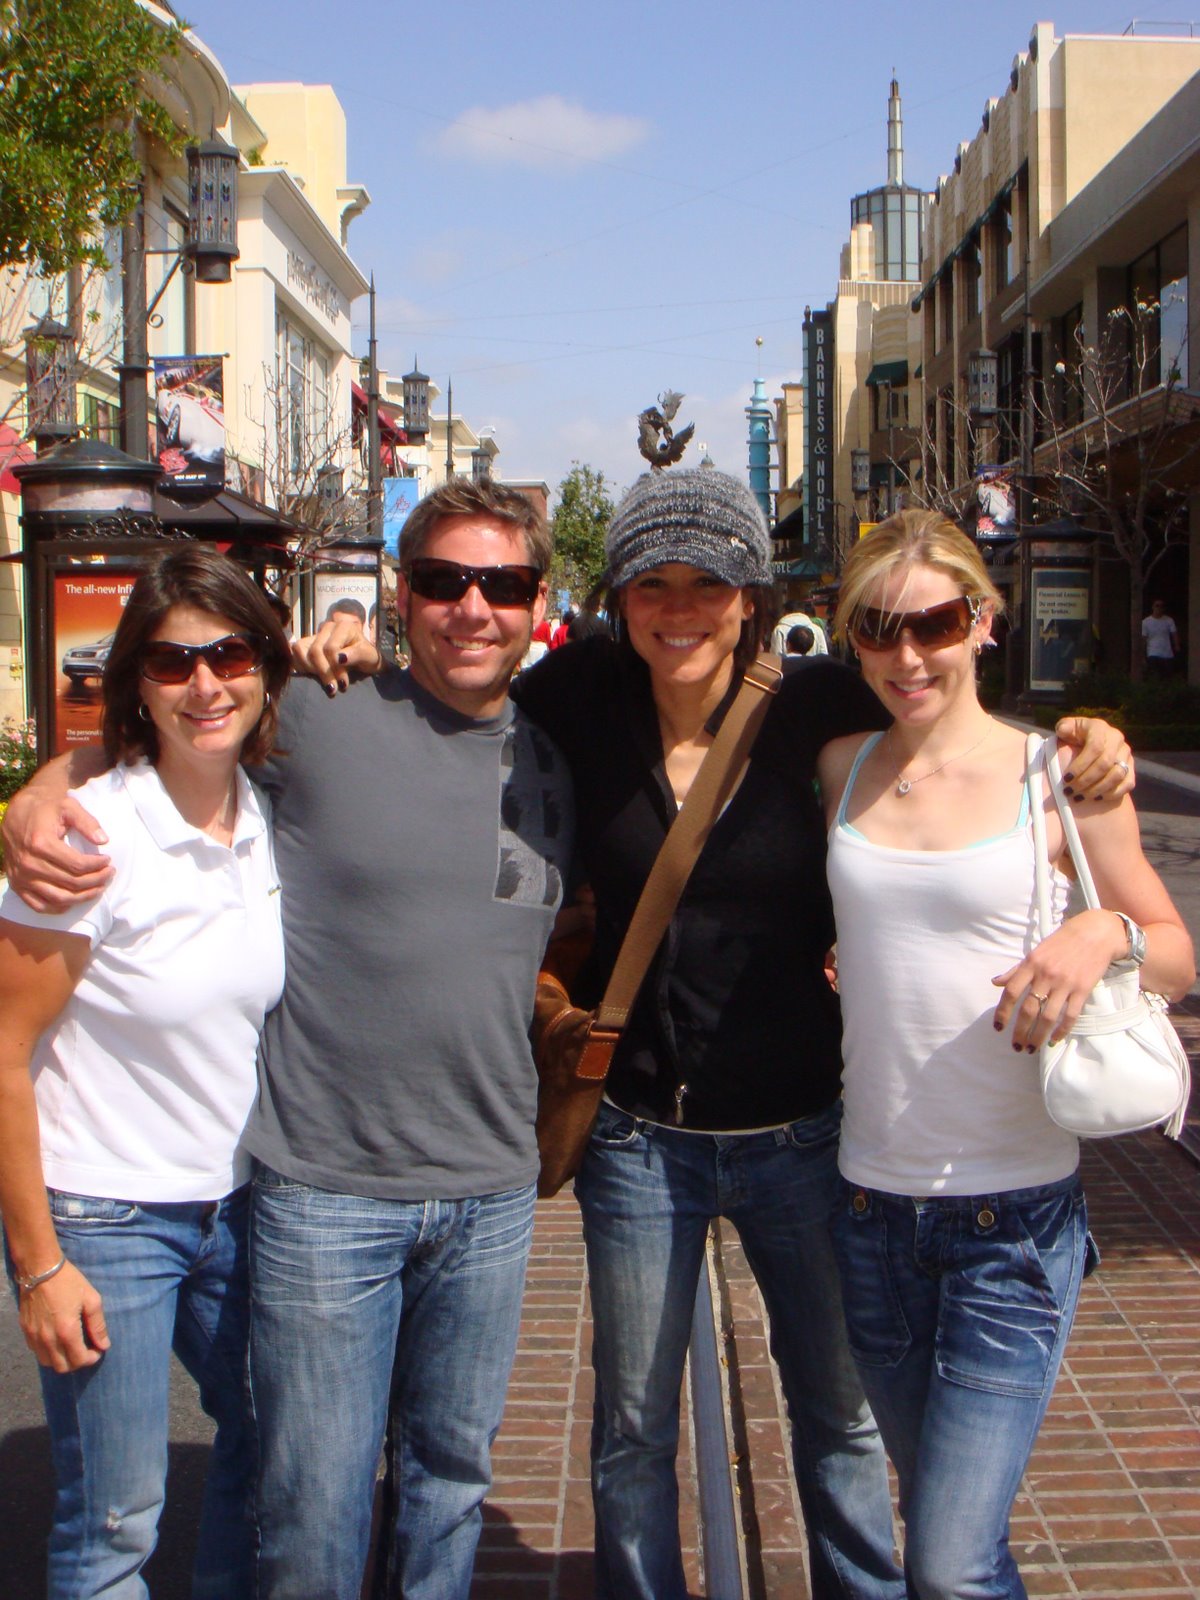 [Shontell,+Jack,+Iona,+and+Me+checking+out+The+Grove+in+Hollywood+-+CA.JPG]